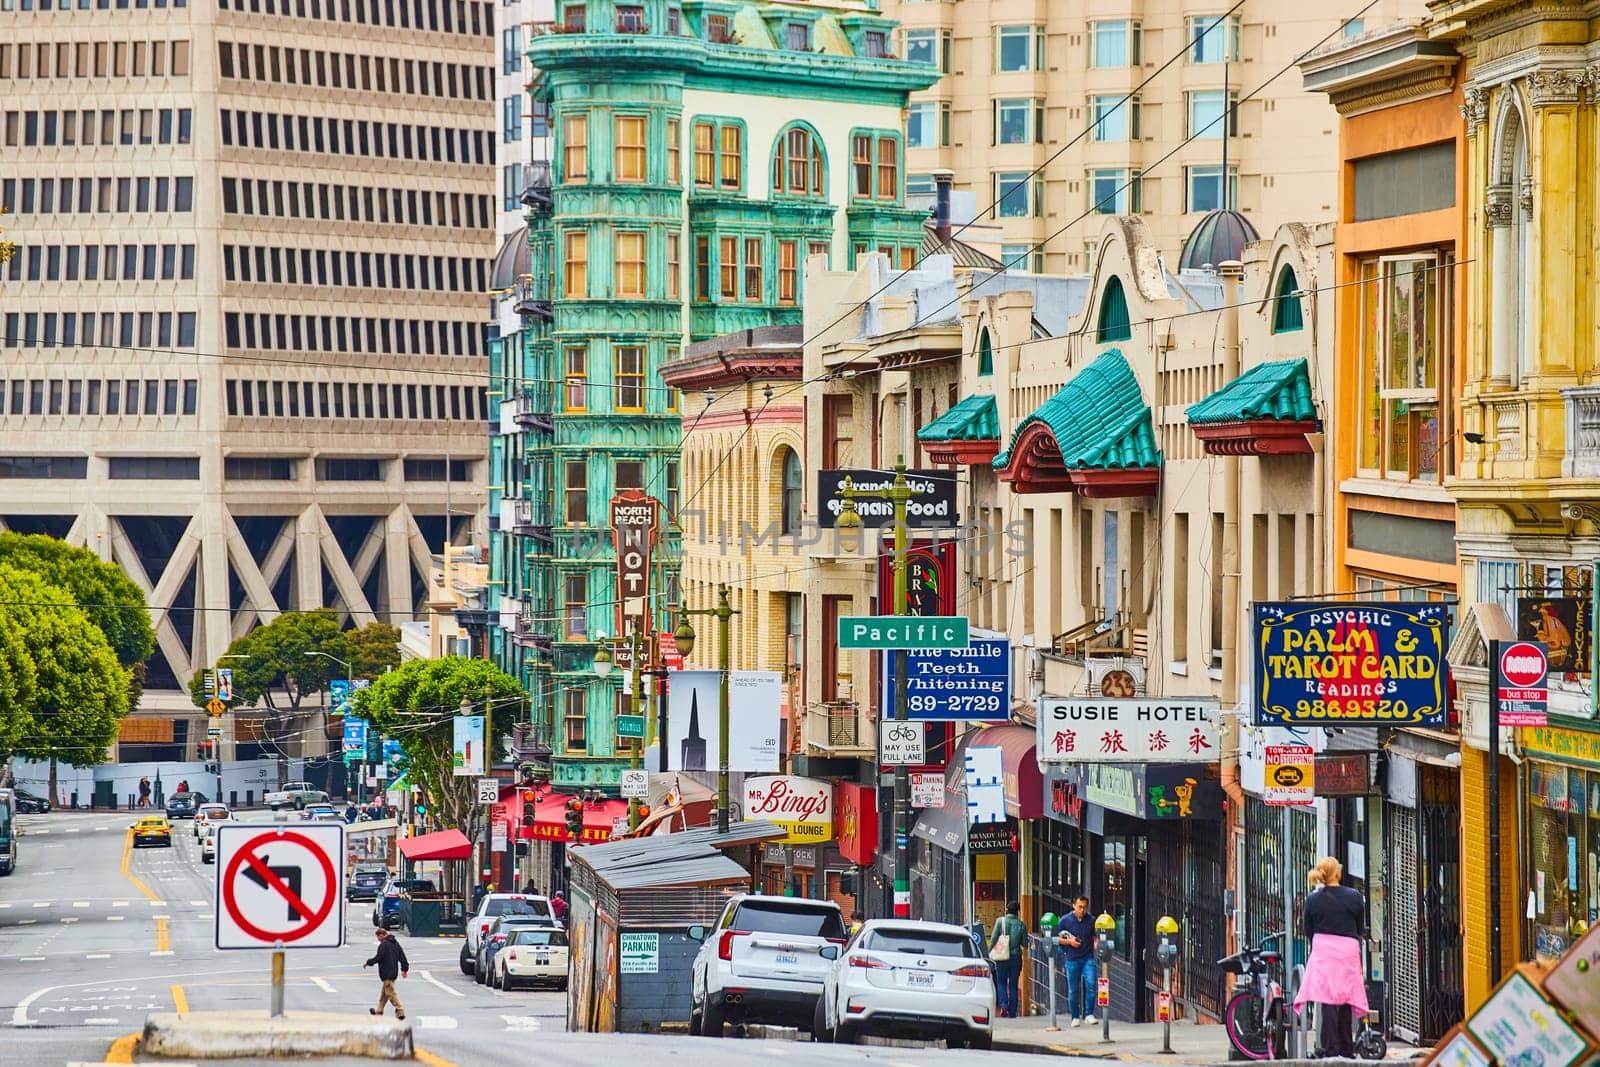 Image of Street view of Chinatown shops and hotels with pedestrians and cars